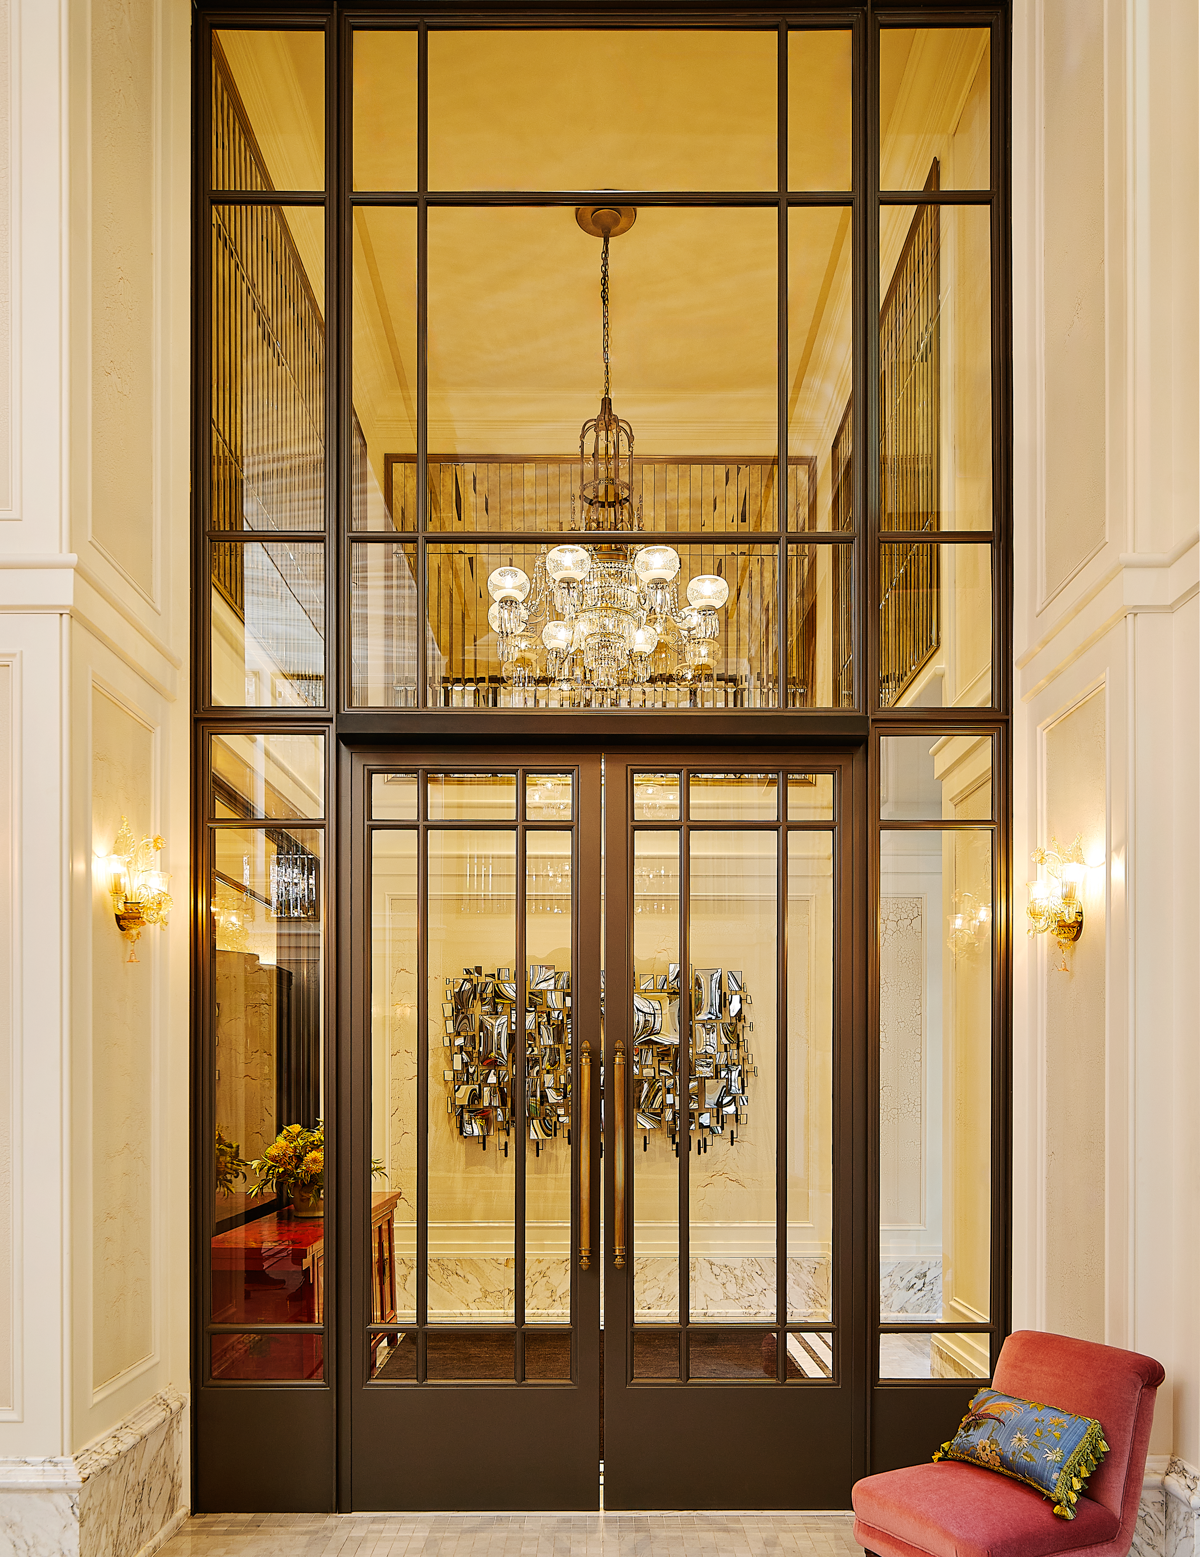 A beautiful glowing chandelier hangs at the entrance of The Fifth Ave Hotel.